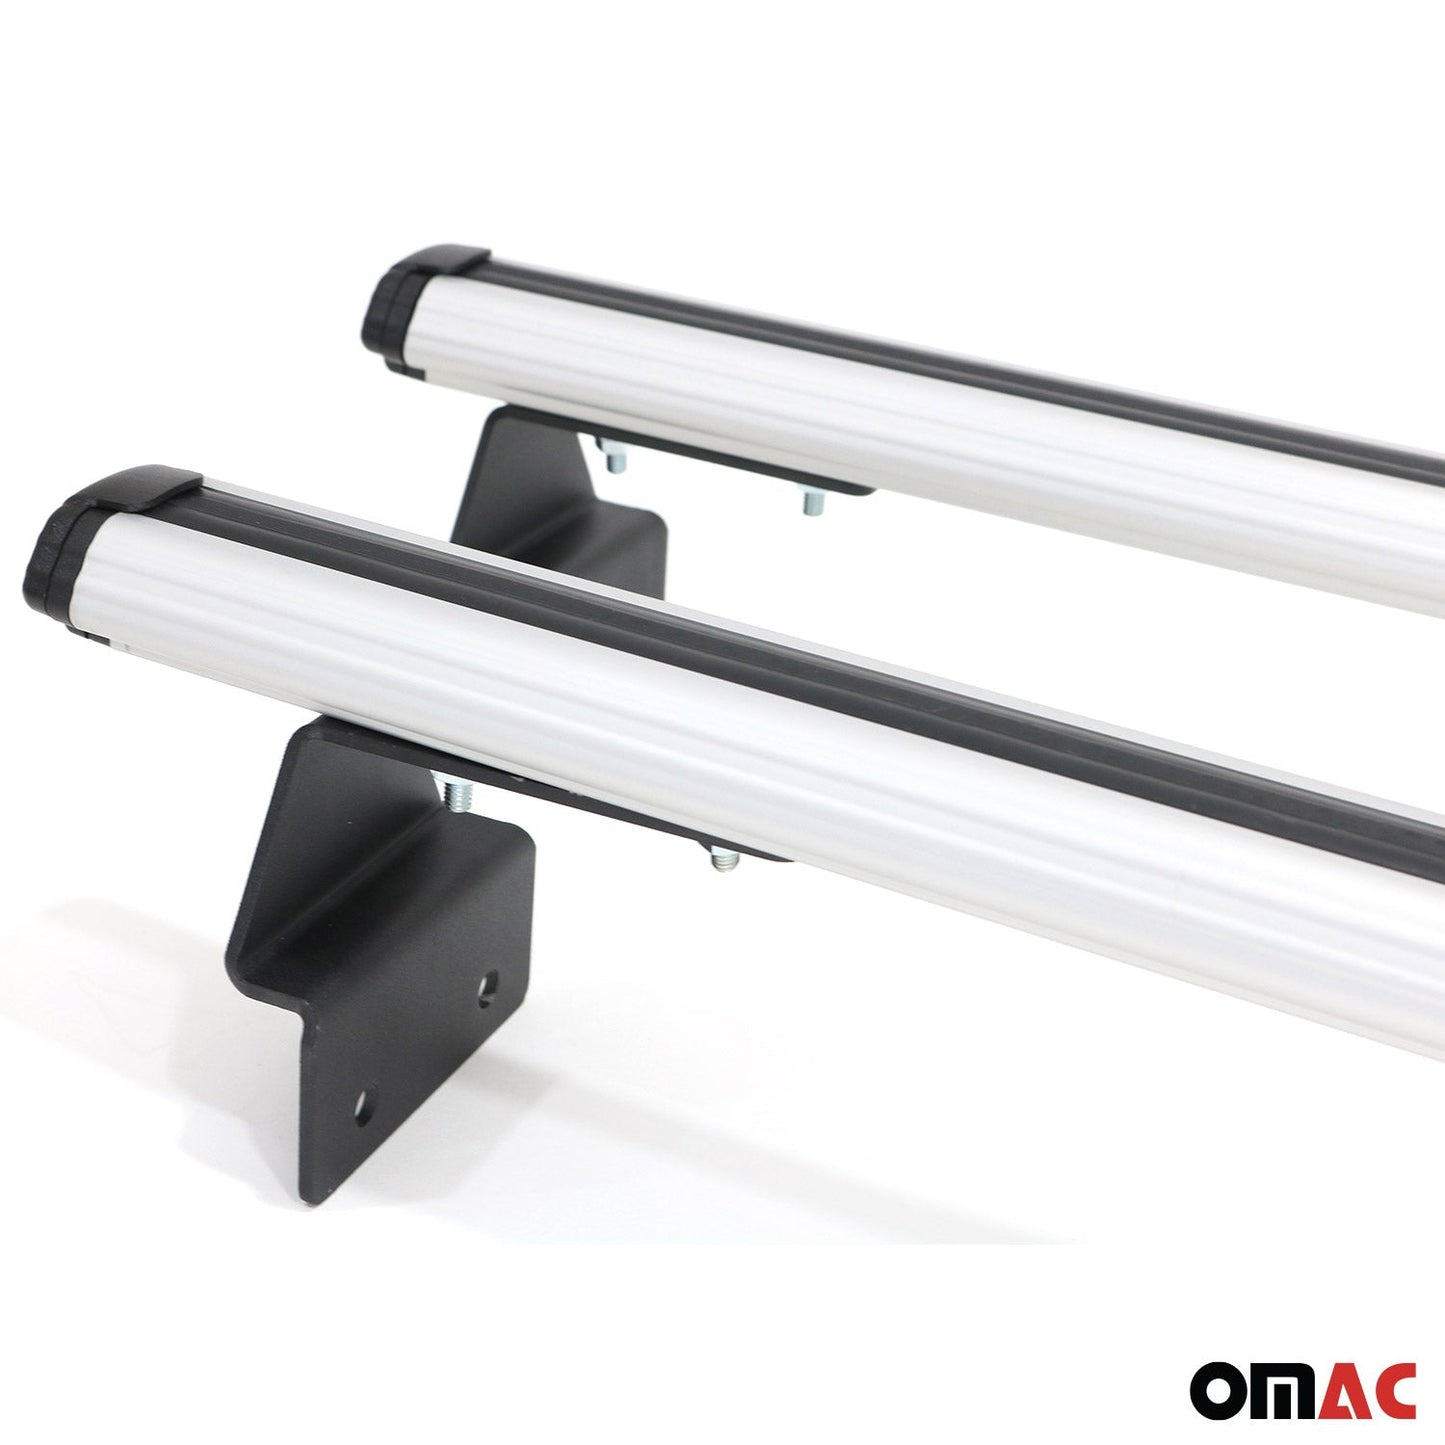 OMAC Trunk Bed Carrier Roof Racks for Nissan Frontier 2005-2021 Gray 2Pcs G001973